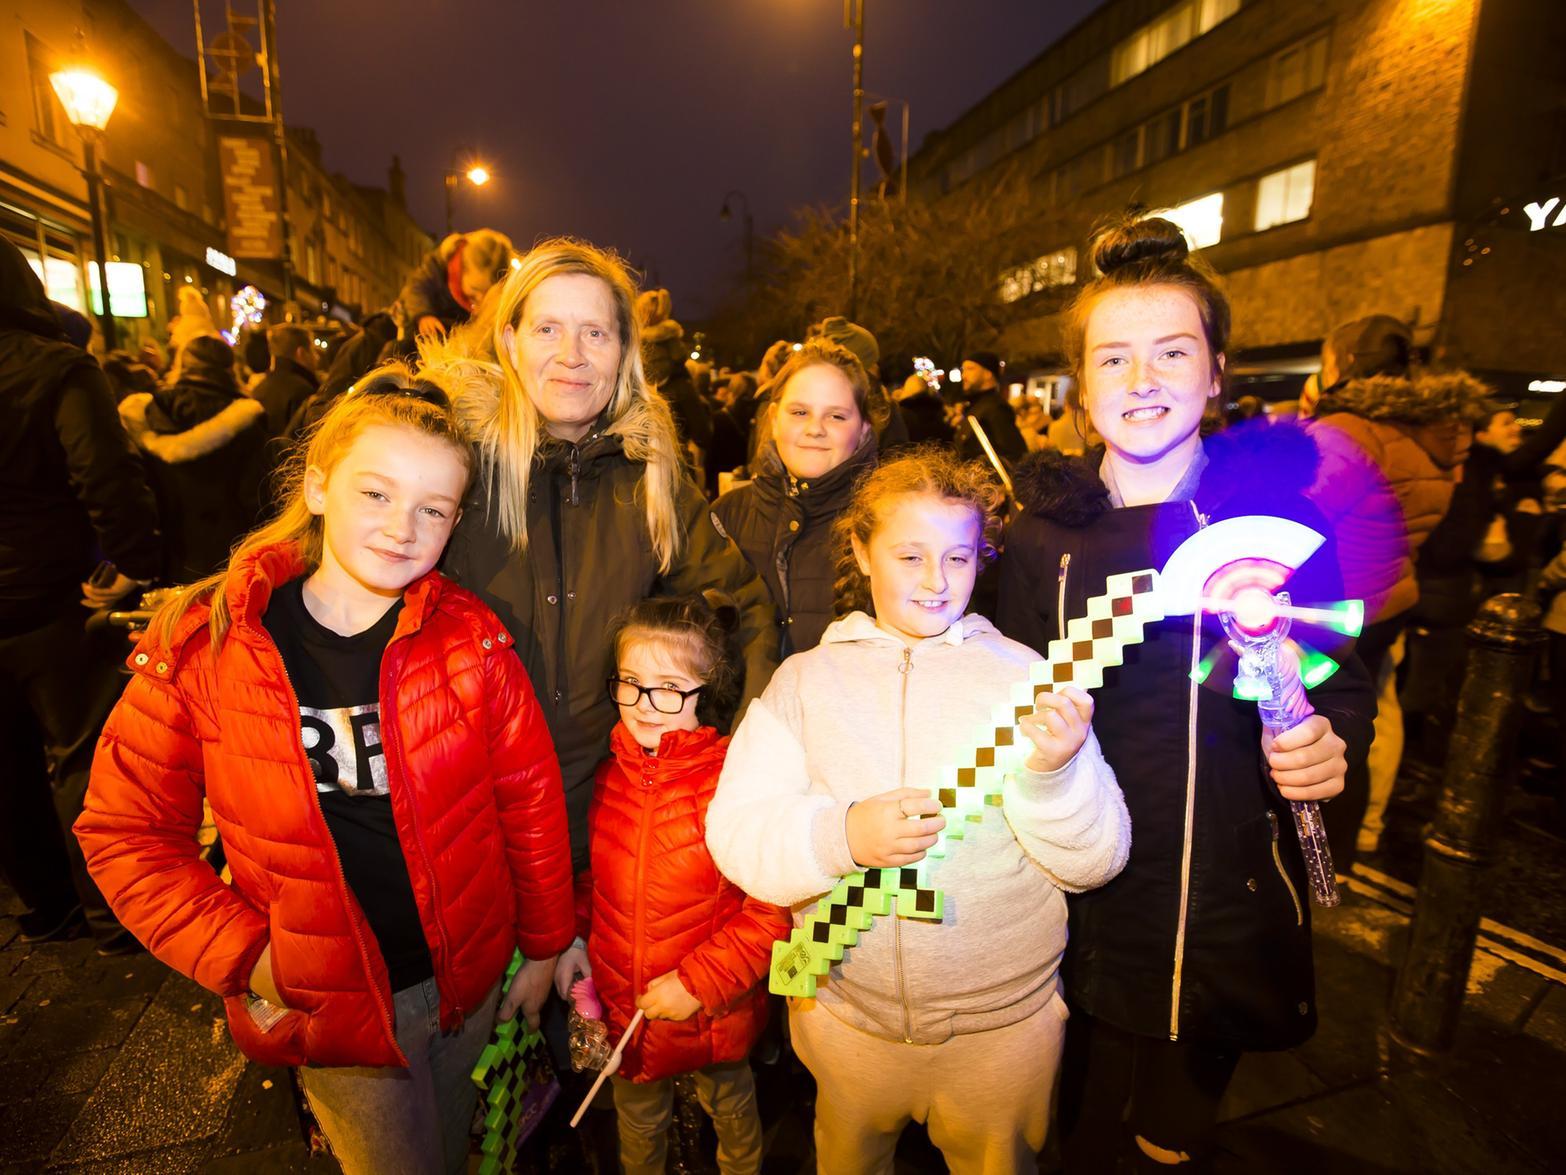 Halifax Christmas lights switch-on. From the left, Niamh O'Connell, eight, Lisa O'Connell, Isla O'Connell, five, Codi Douglas, 12, Aoife O'Connell, nine, and Erin O'Connell, 12.